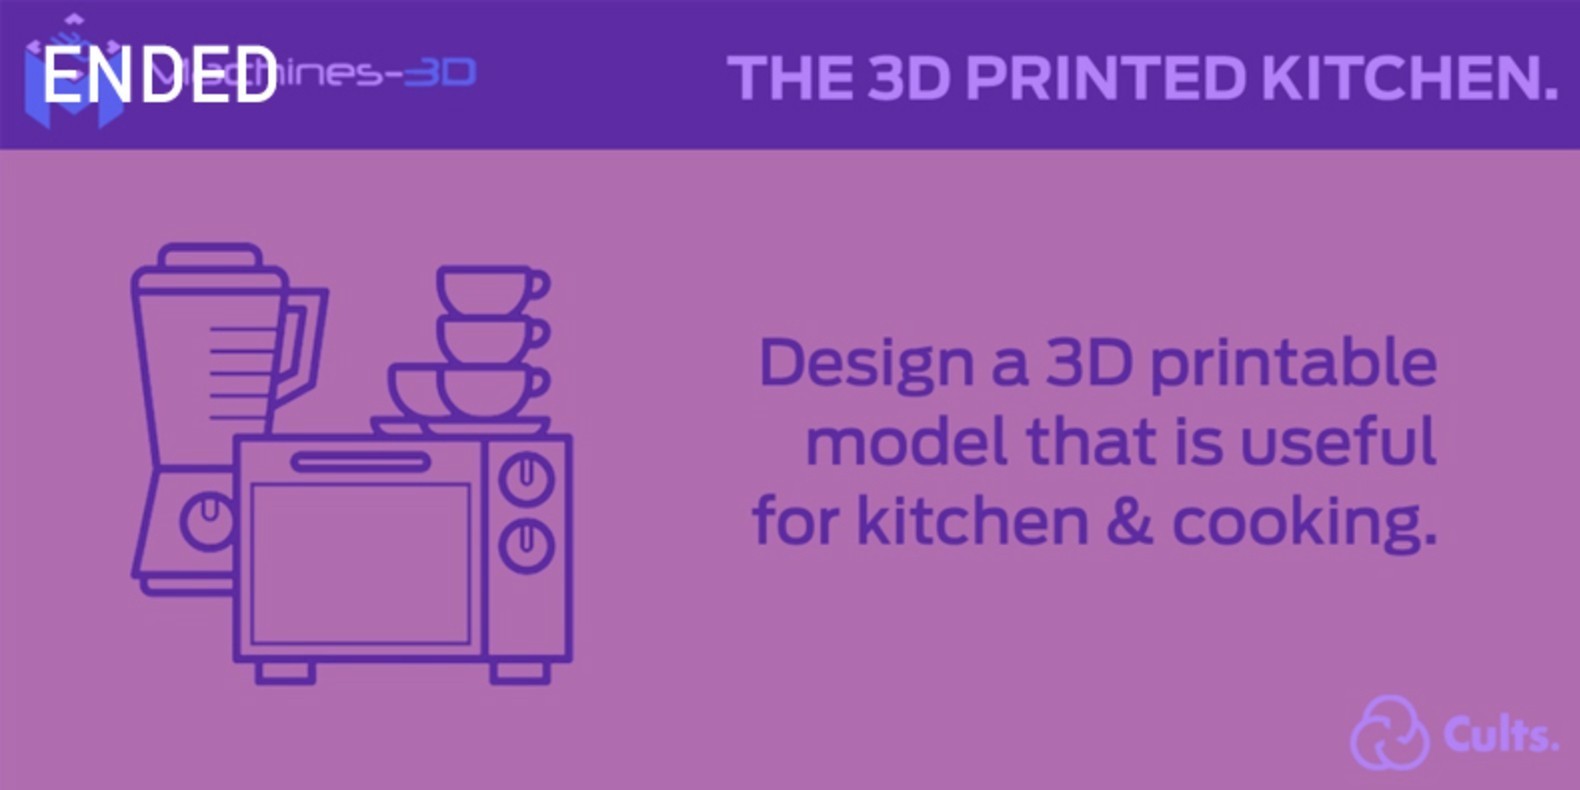 The challenge of design and 3D printing about the kitchen.